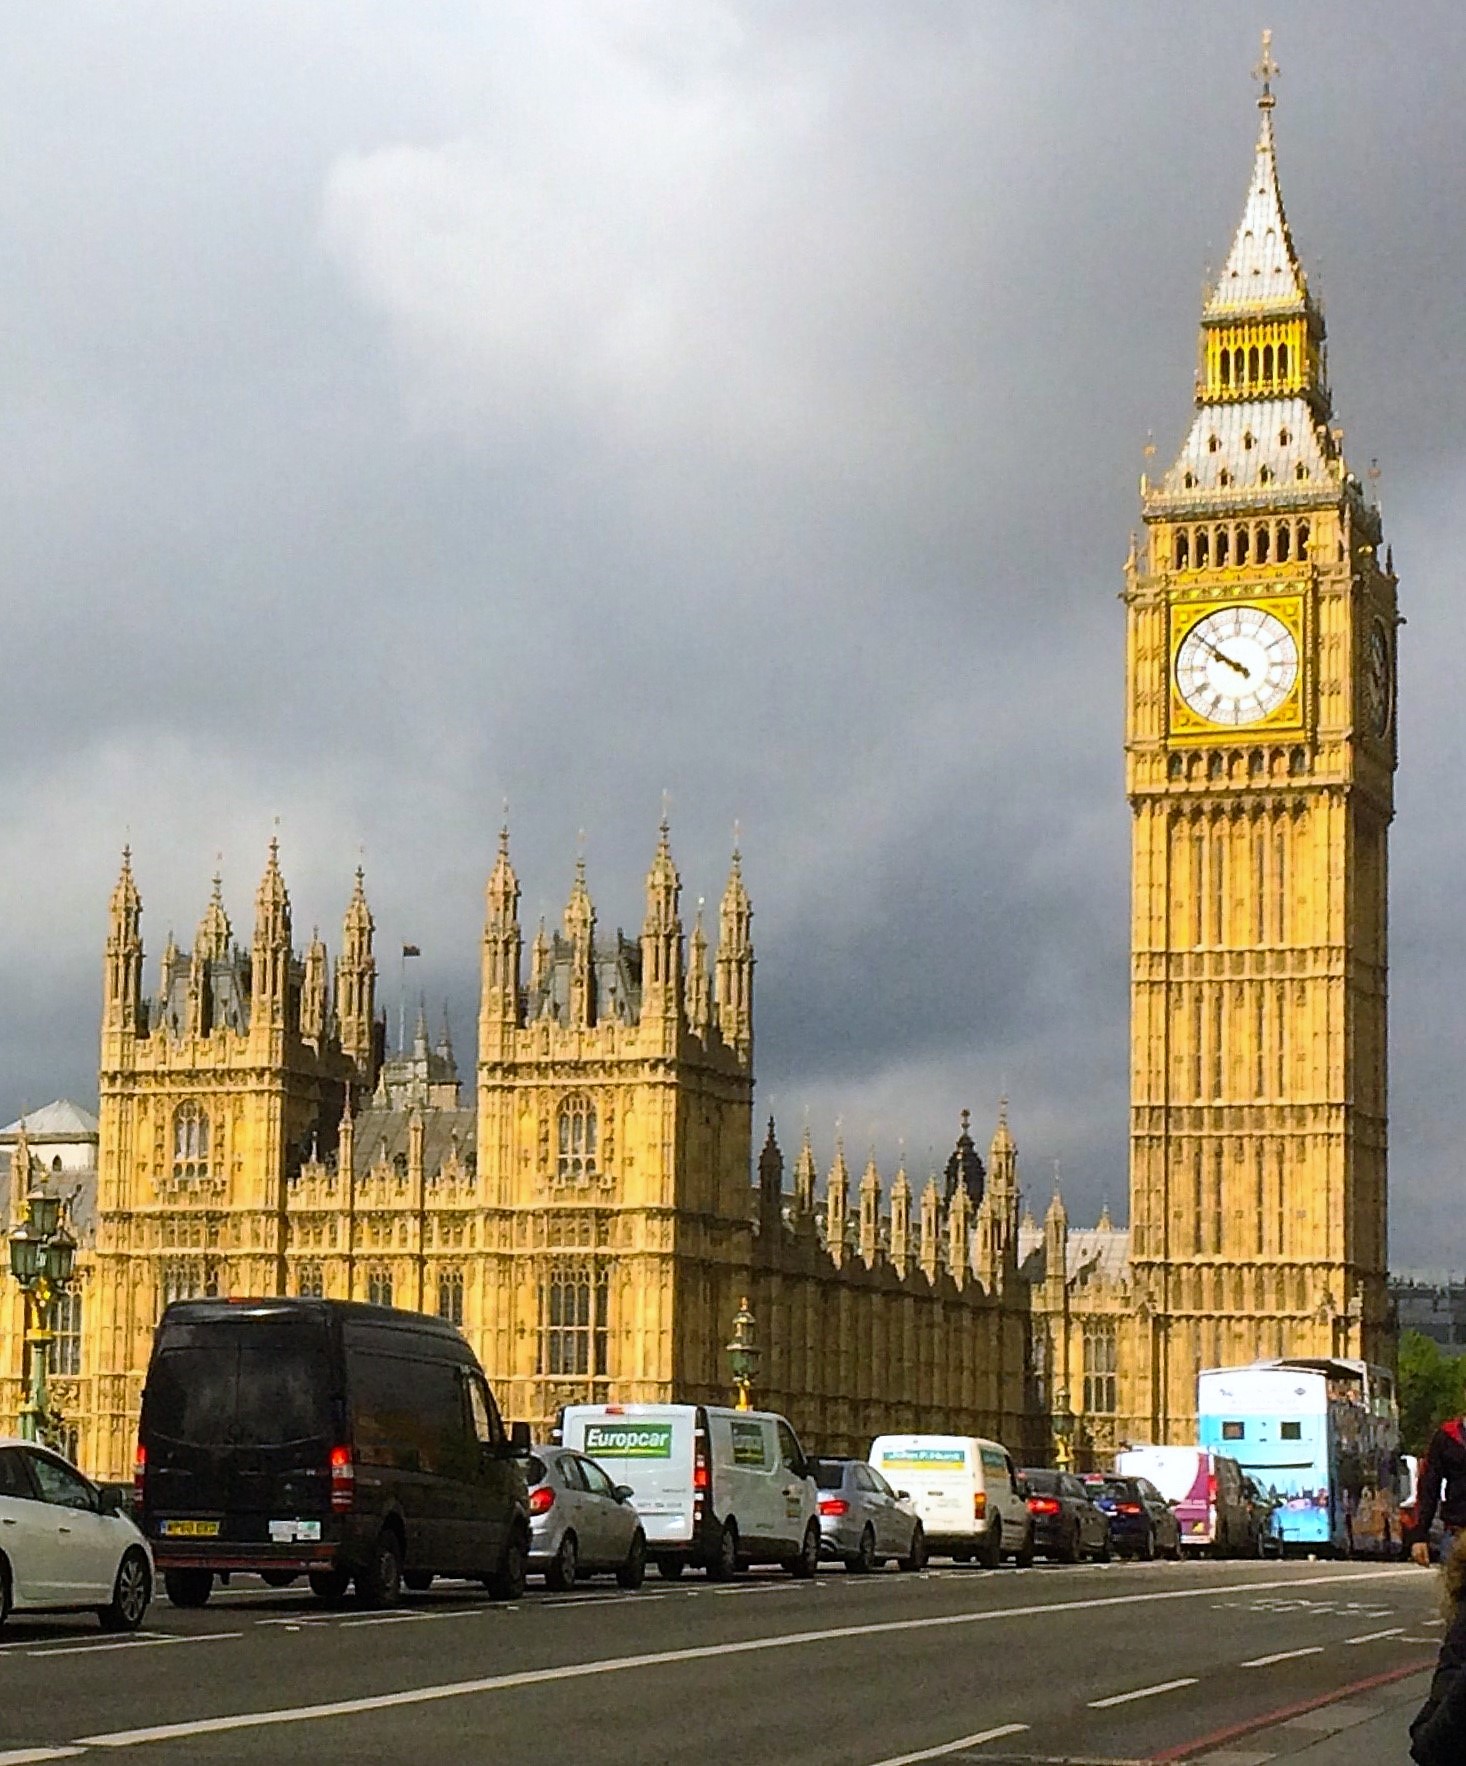 Visit London in 2 Days - Unique Itinerary - Pic by Erika Price